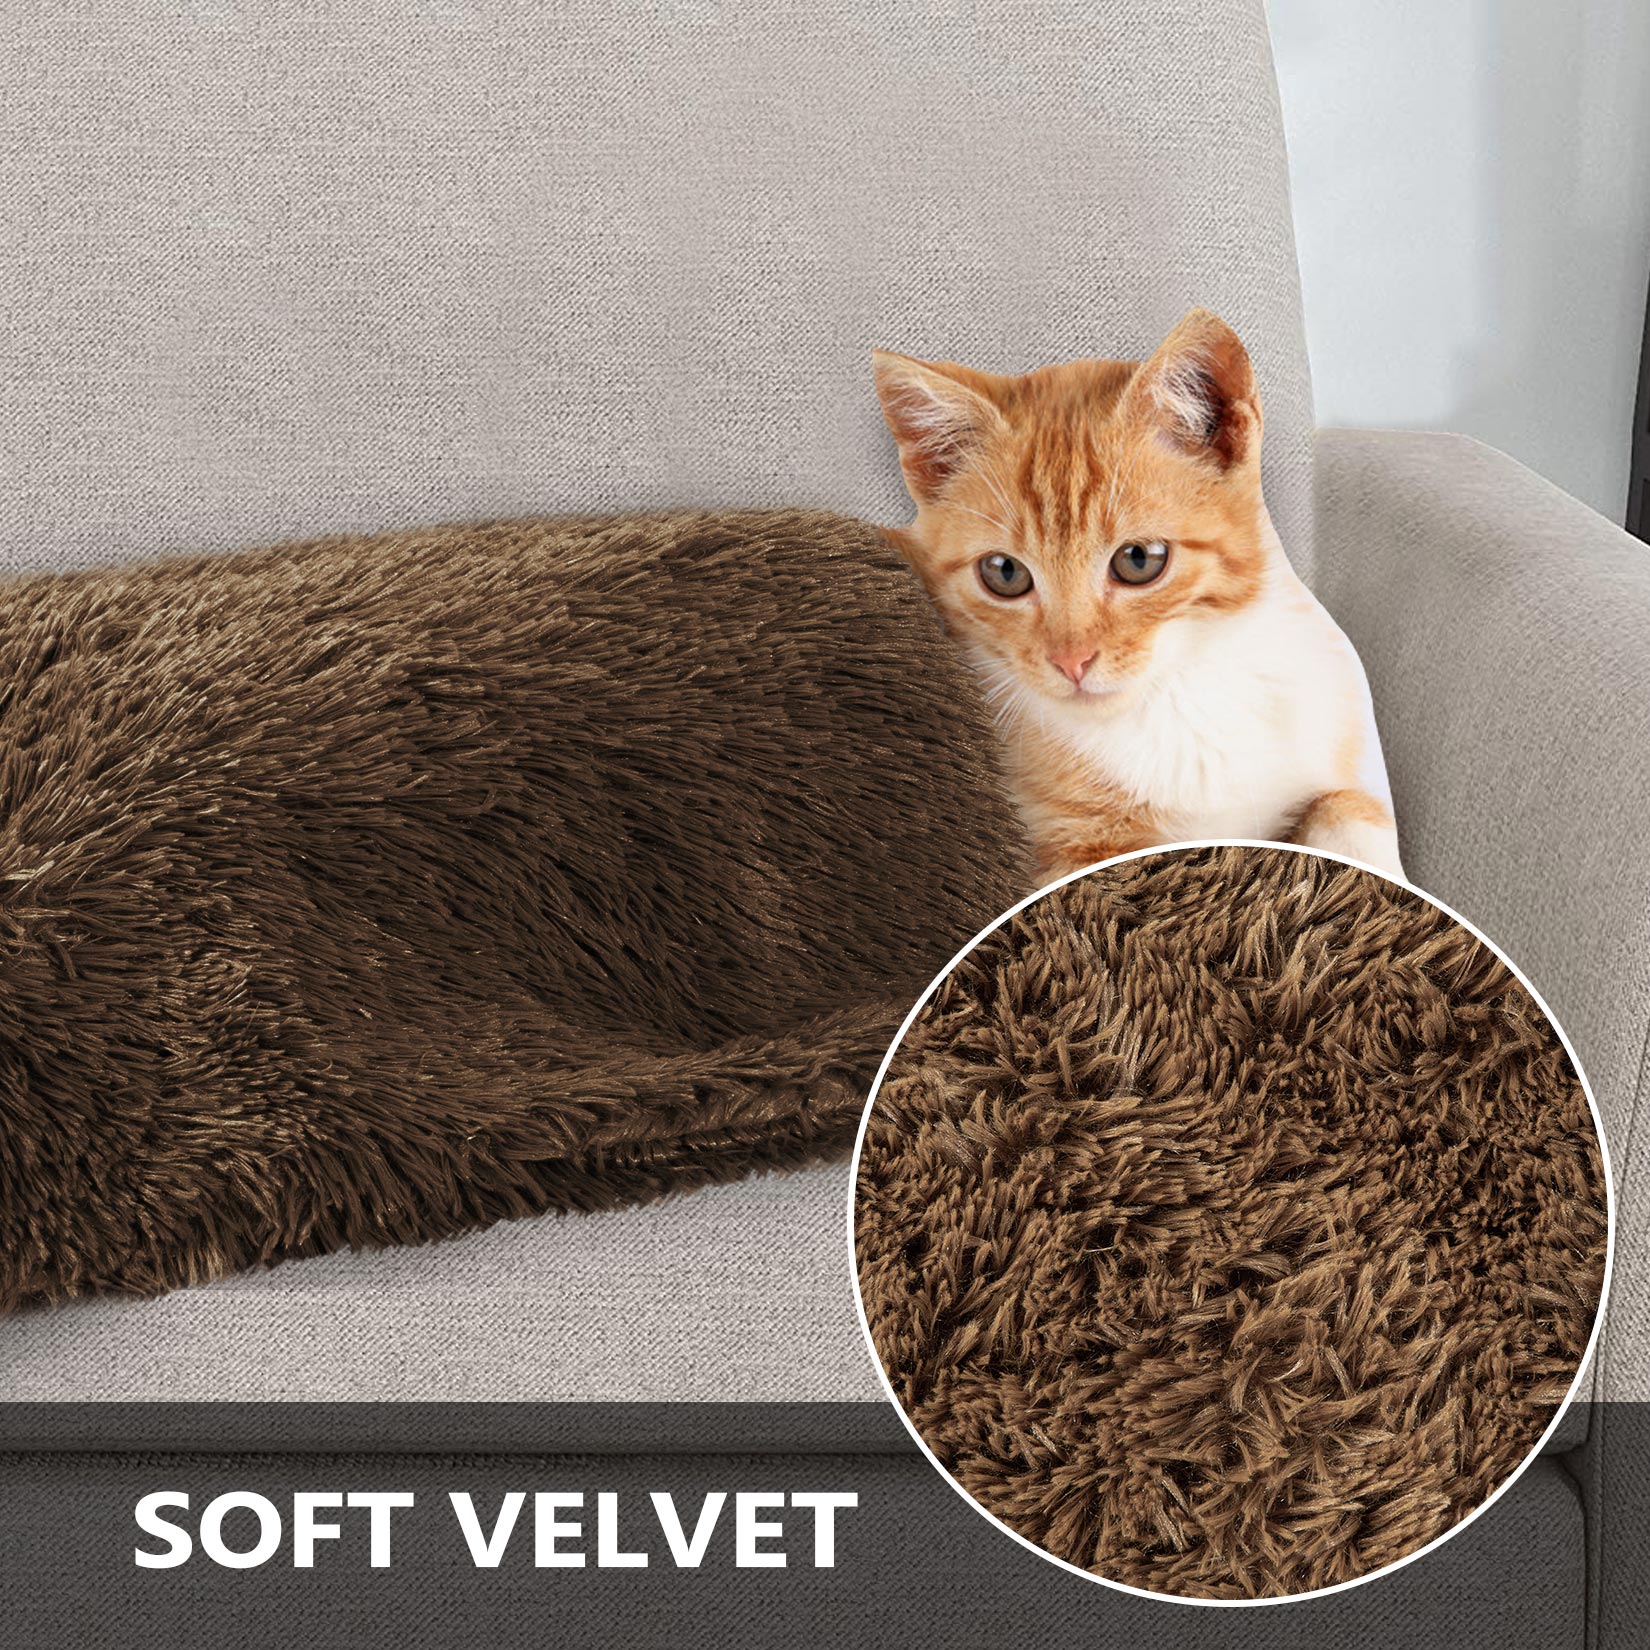 HA-EMORE Waterproof Dog Blanket for Bed Couch Sofa Soft Warm Fluffy Faux Fur Fleece Puppy Blankets Machine Washable Pet Blanket Brown 80×120cm - image 3 of 4